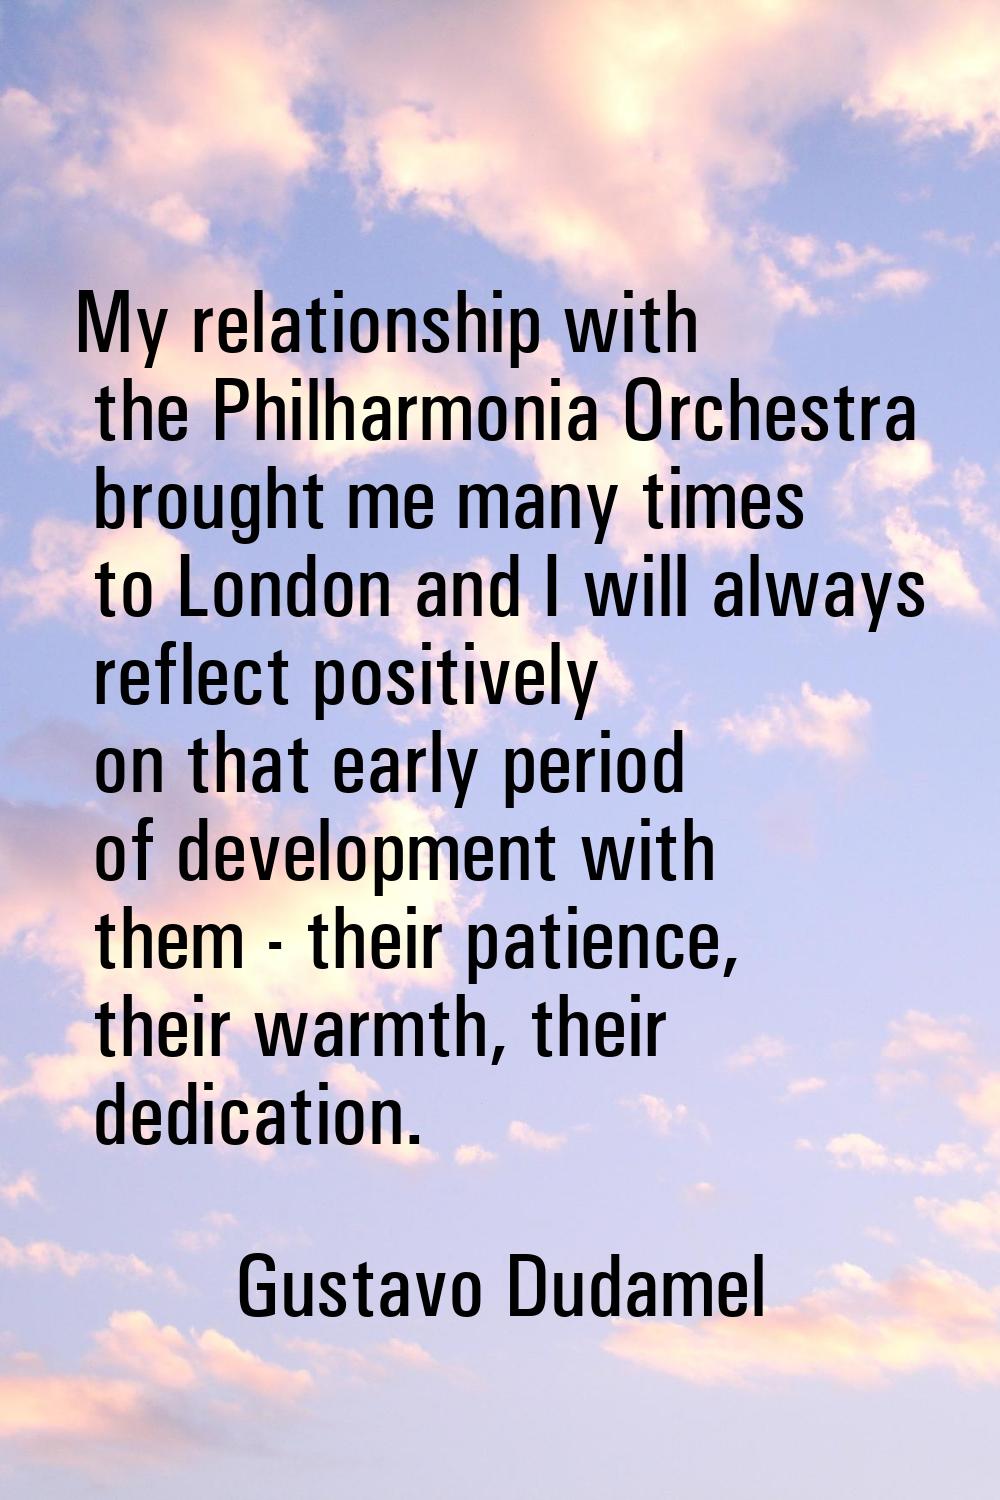 My relationship with the Philharmonia Orchestra brought me many times to London and I will always r